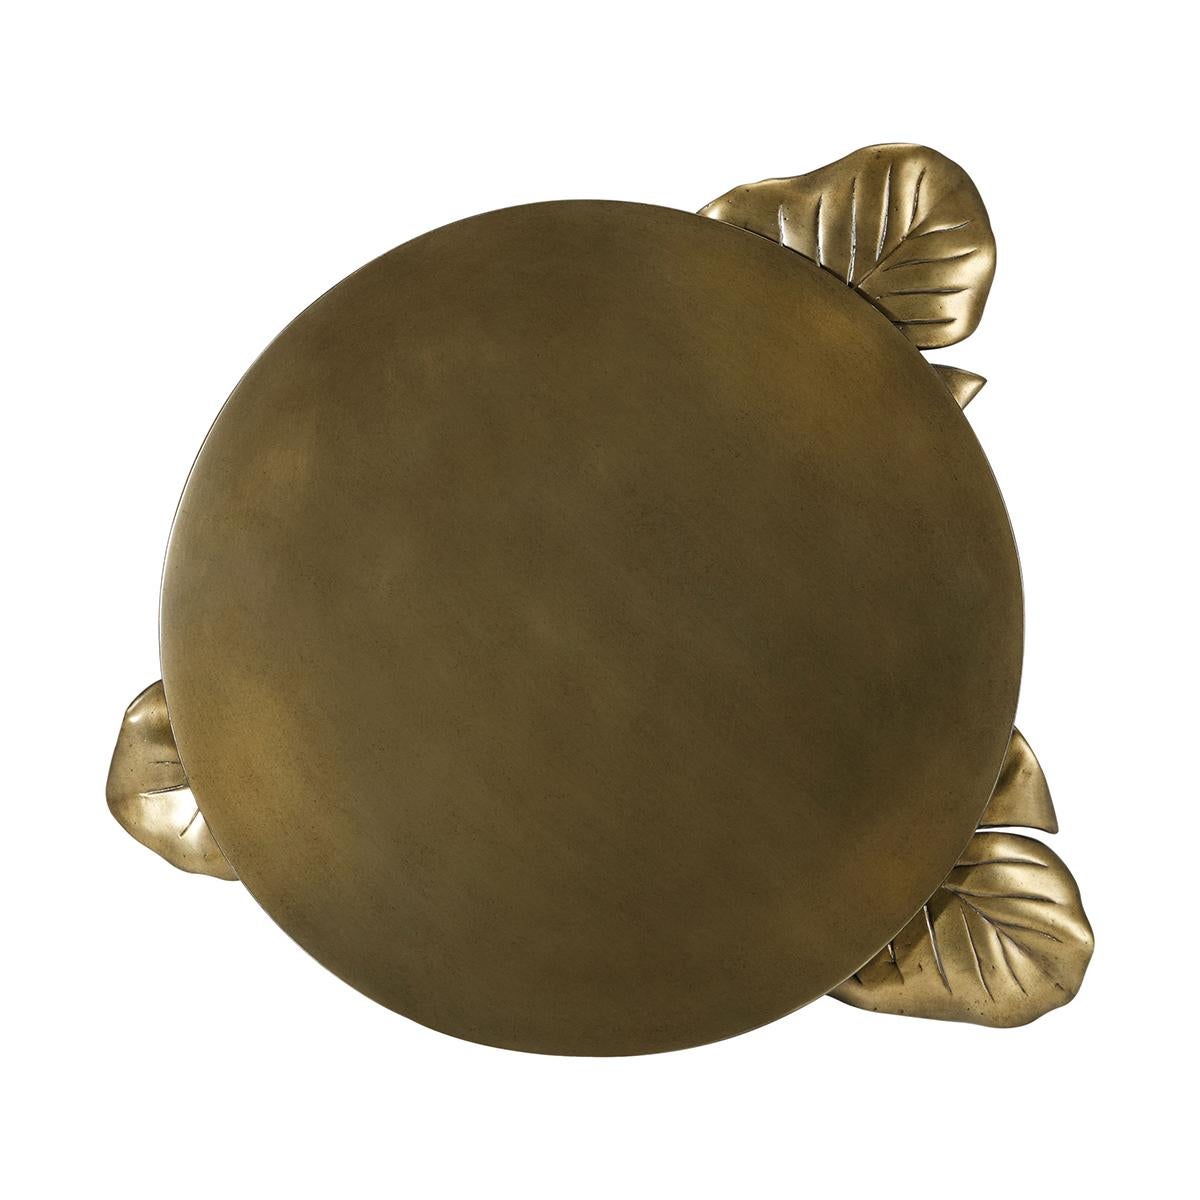 An artful blend of form and function, is a stunning sculptural statement piece. Depicting the natural elegance of banana leaves, this piece is hand cast and finished in the Venetian gold finish.

Dimensions: 17